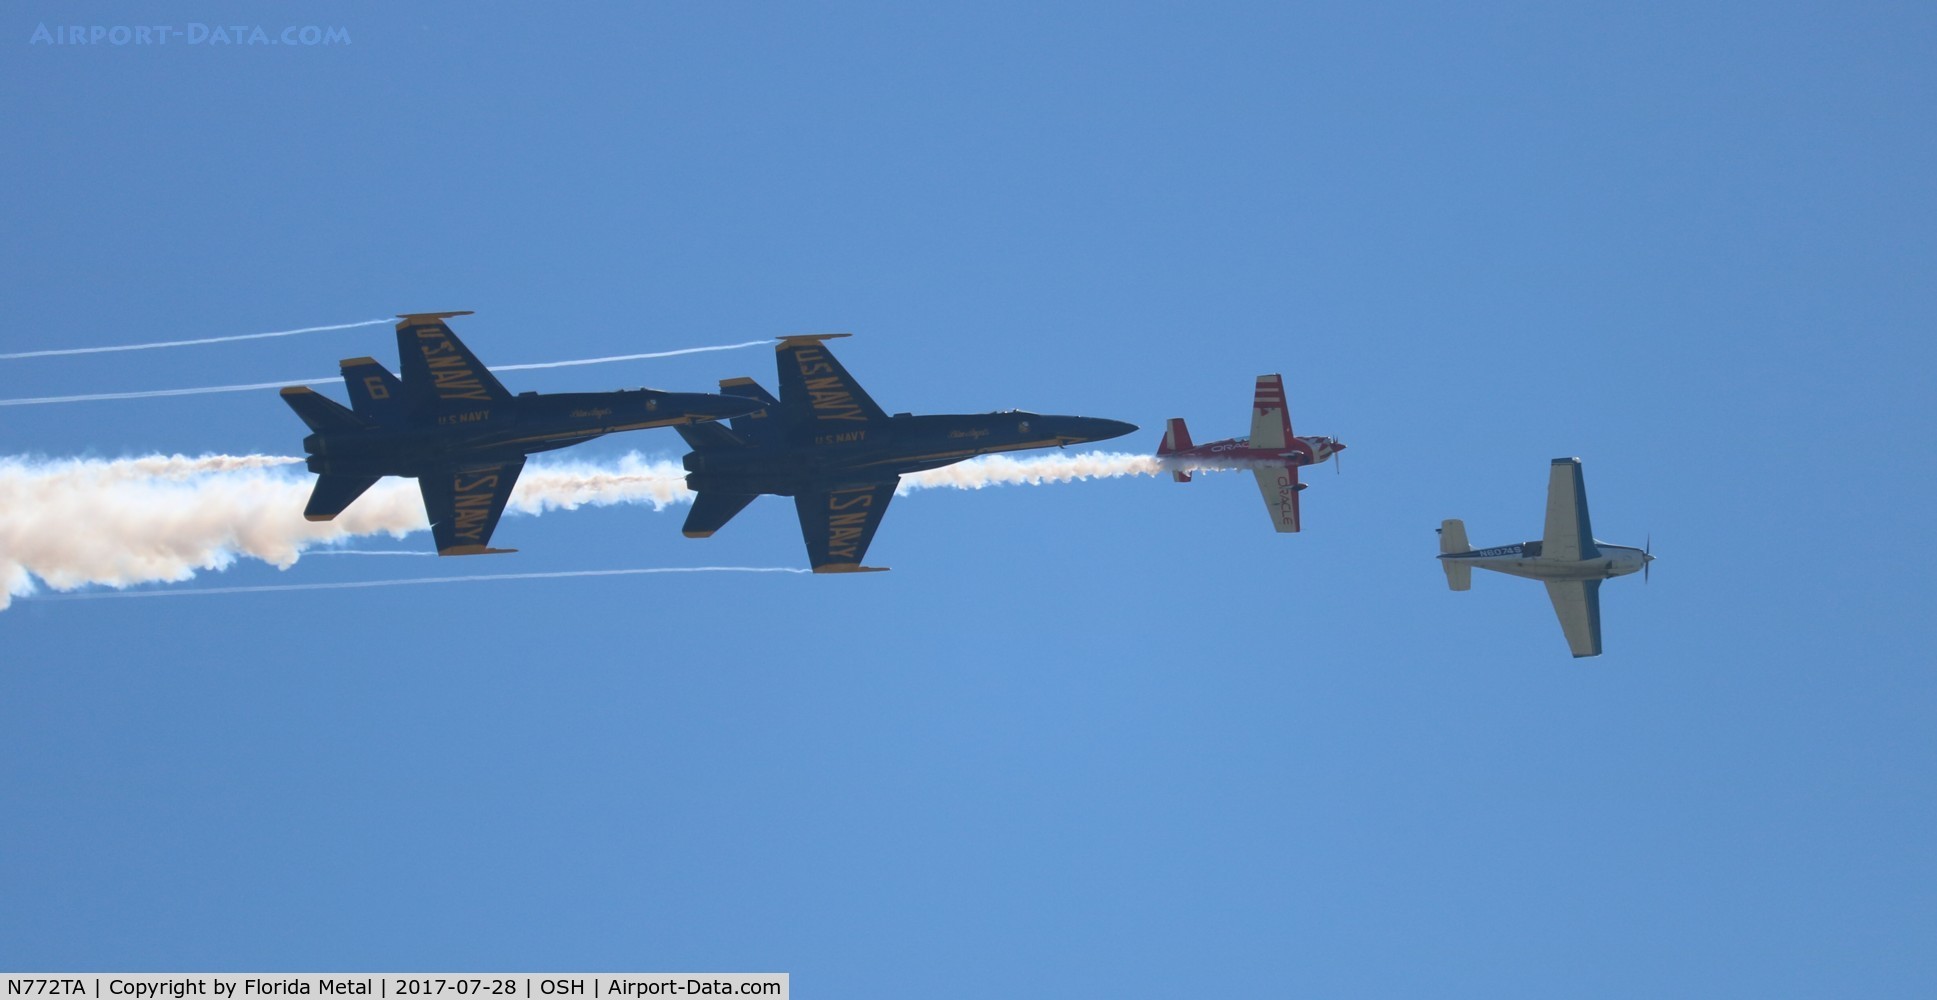 N772TA, 2007 Extra EA-300/L C/N 1260, Extra 300 with the Blue Angels